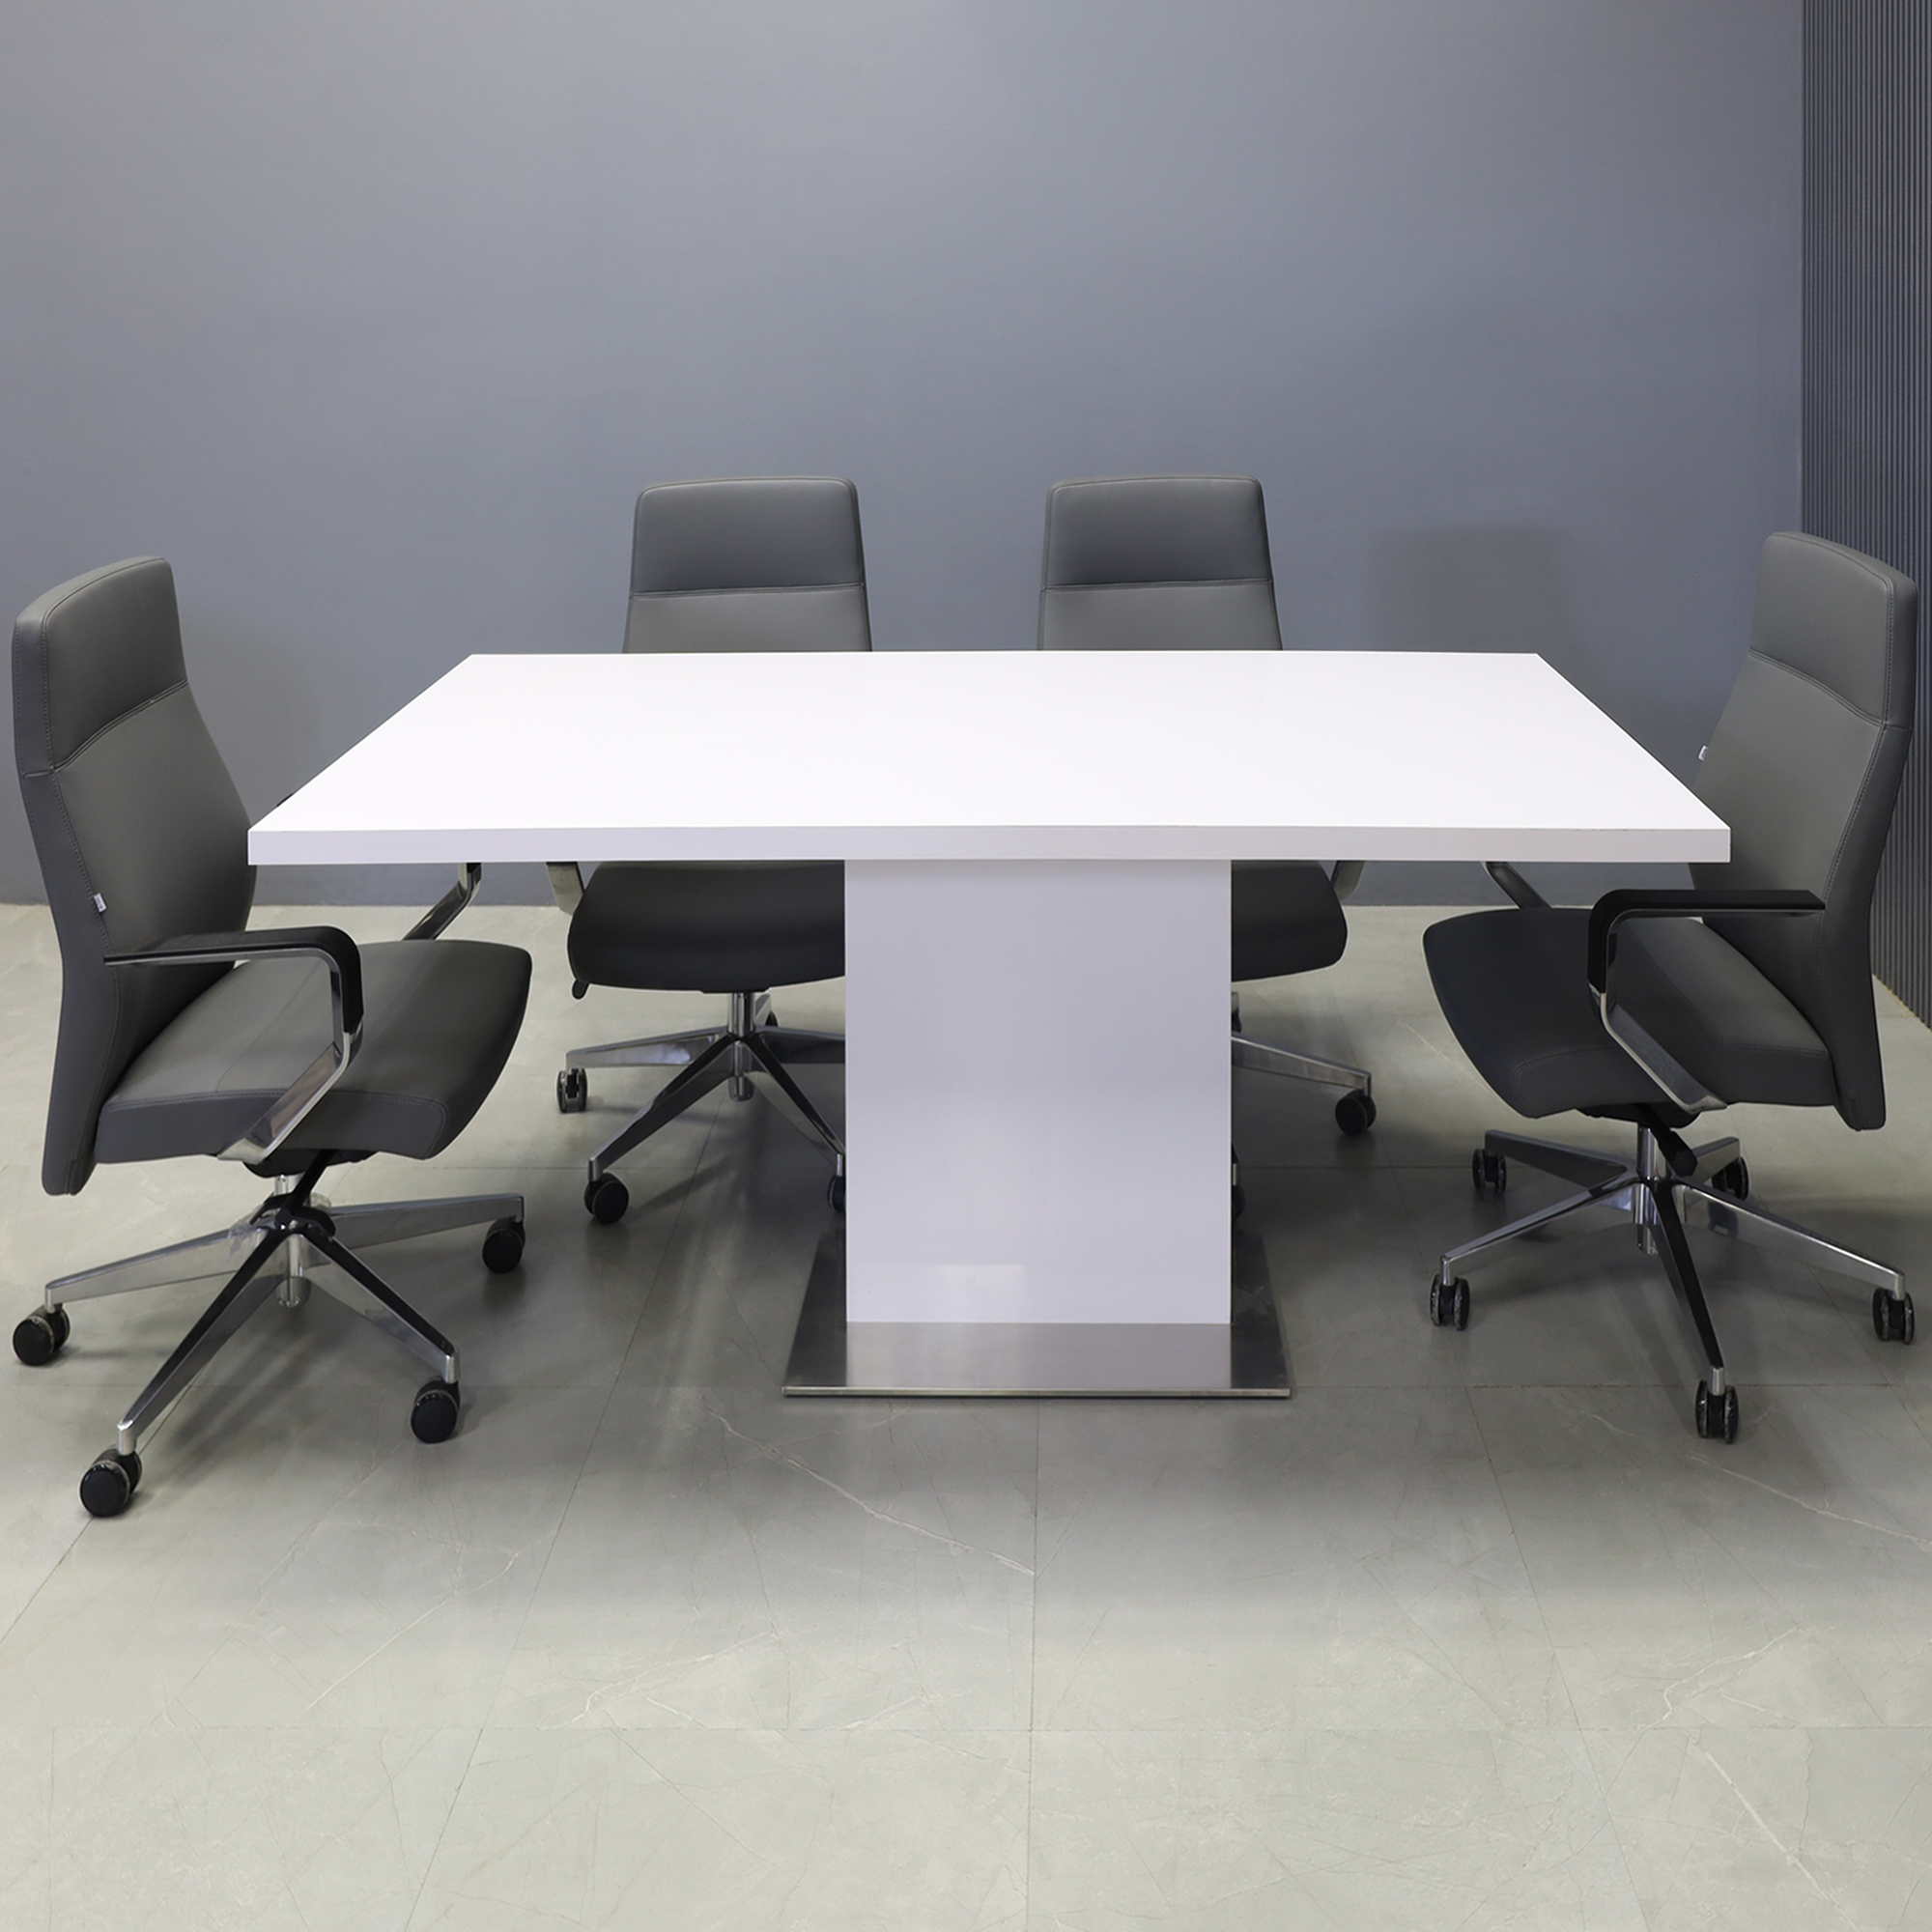 72-inch Newton Rectangular Conference Table in white gloss laminate top and custom pedestal base in white gloss laminate & brushed stainless steel, shown here.